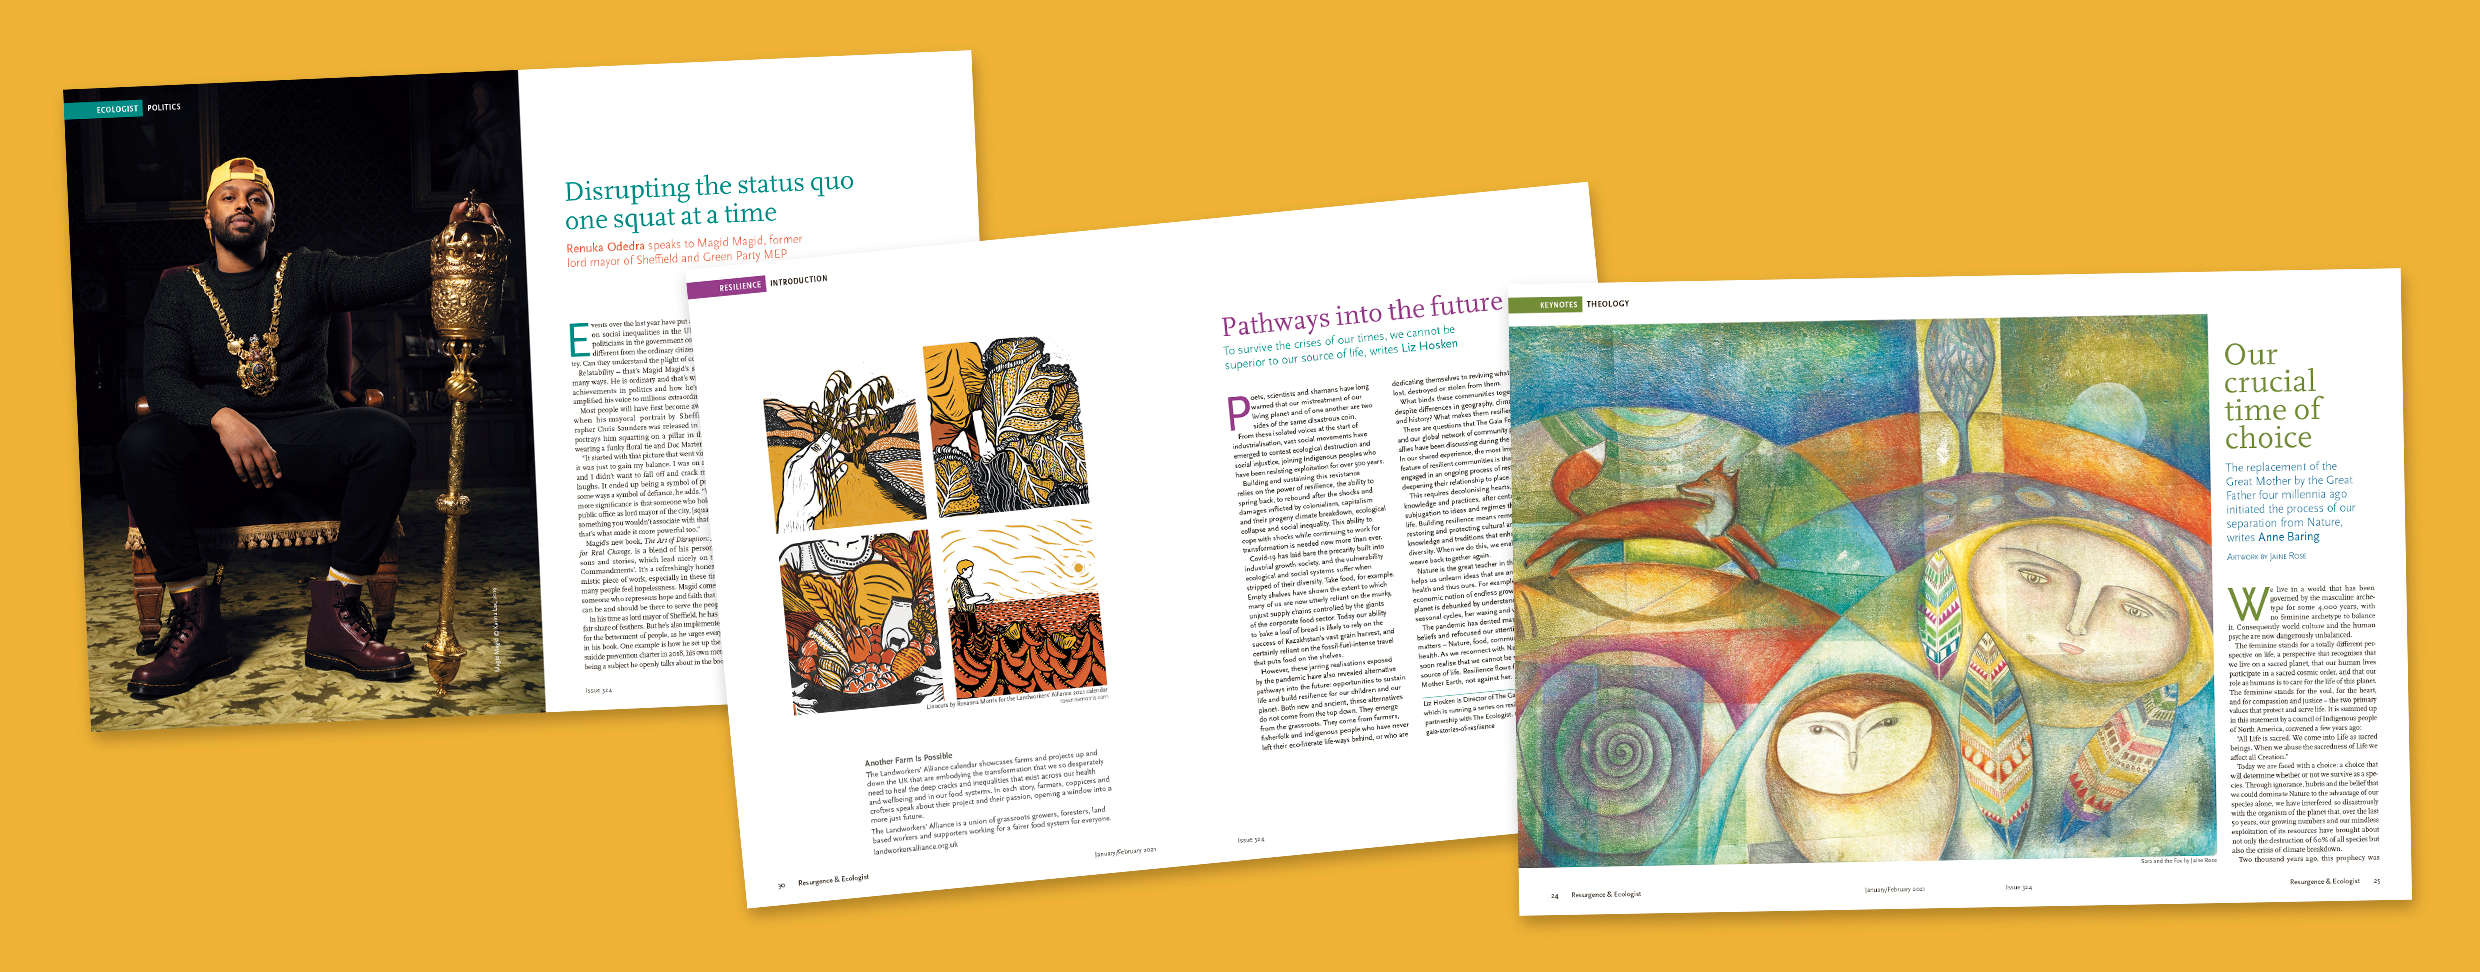 Images from Resurgence and Ecologist Magazine issue 324